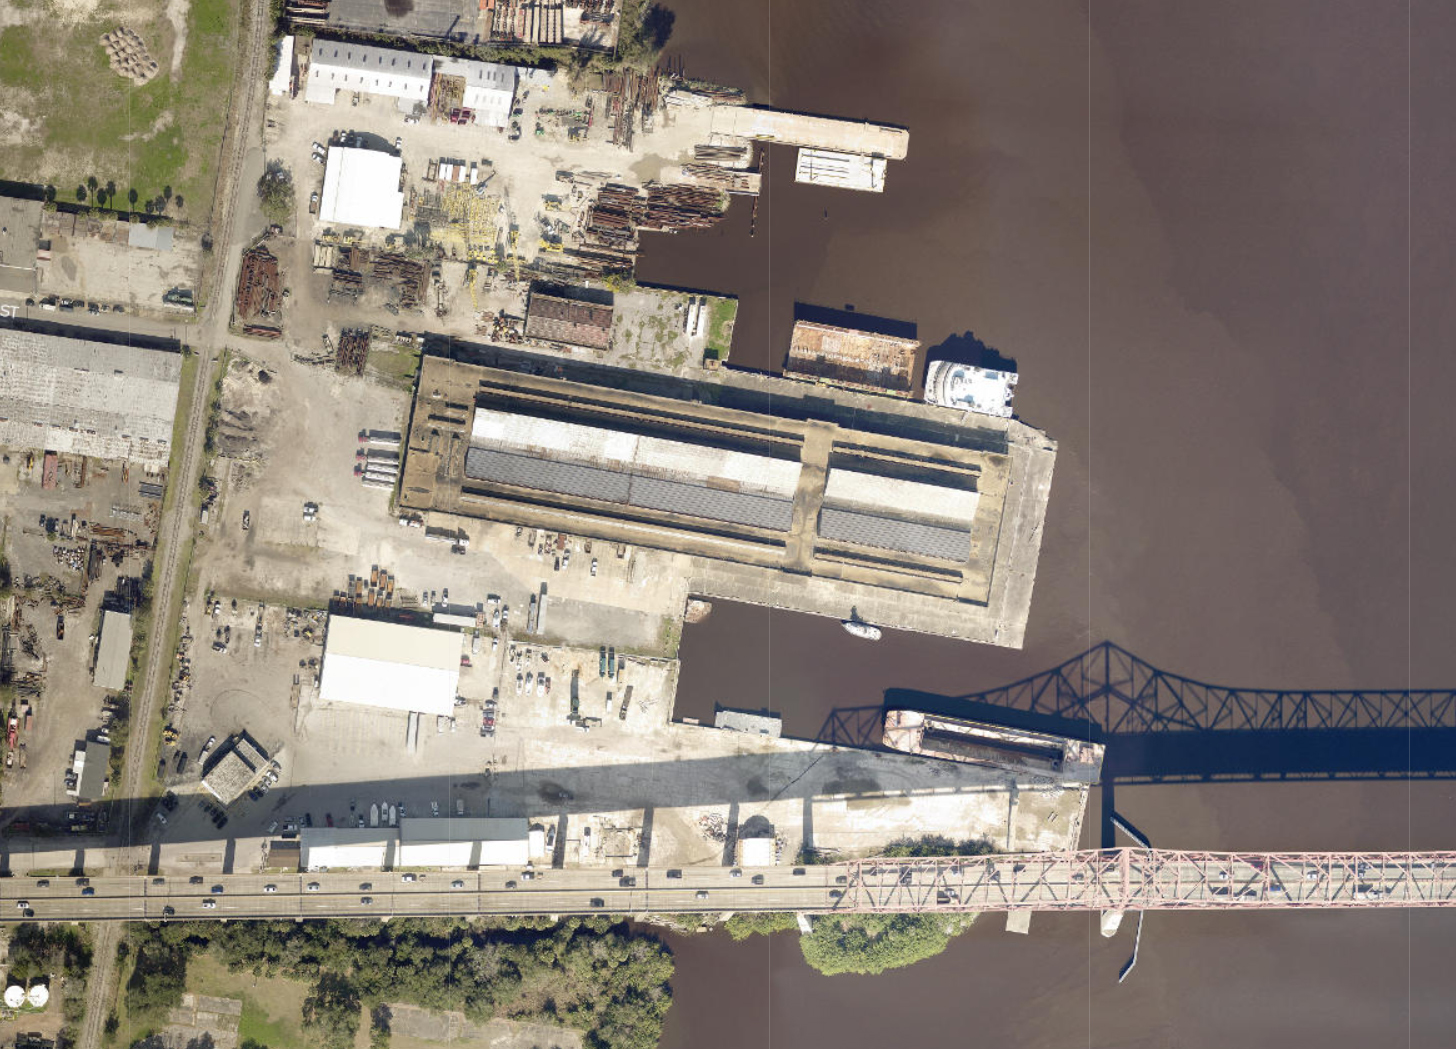 A satellite image of the former Ford Motor Co. factory. The 14.64-acre site is north of the Mathews Bridge.